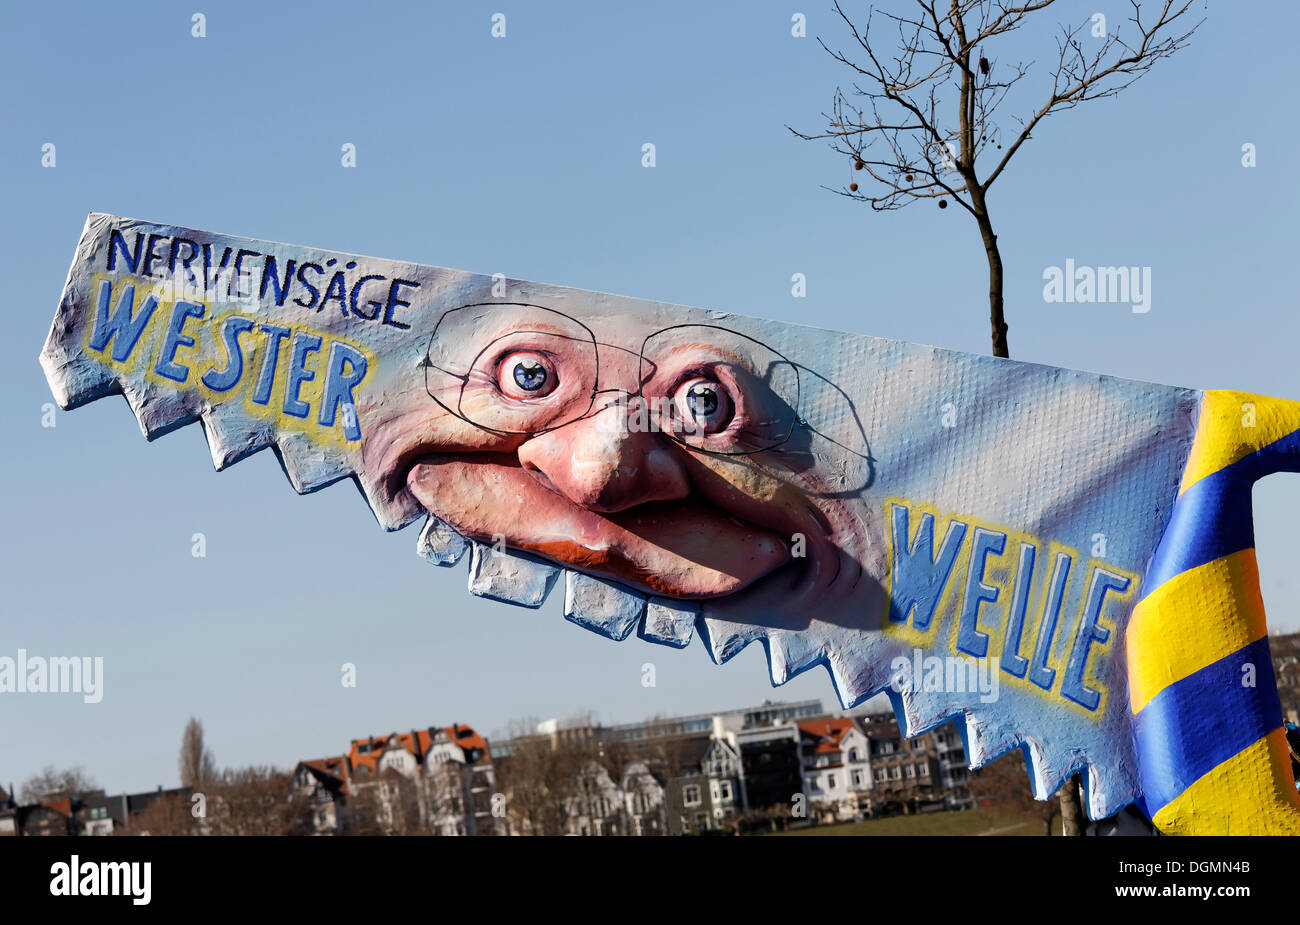 Minister of Foreign Affairs Westerwelle as a nuisance, paper-mache figure, satirical themed parade float at the Rosenmontagszug Stock Photo